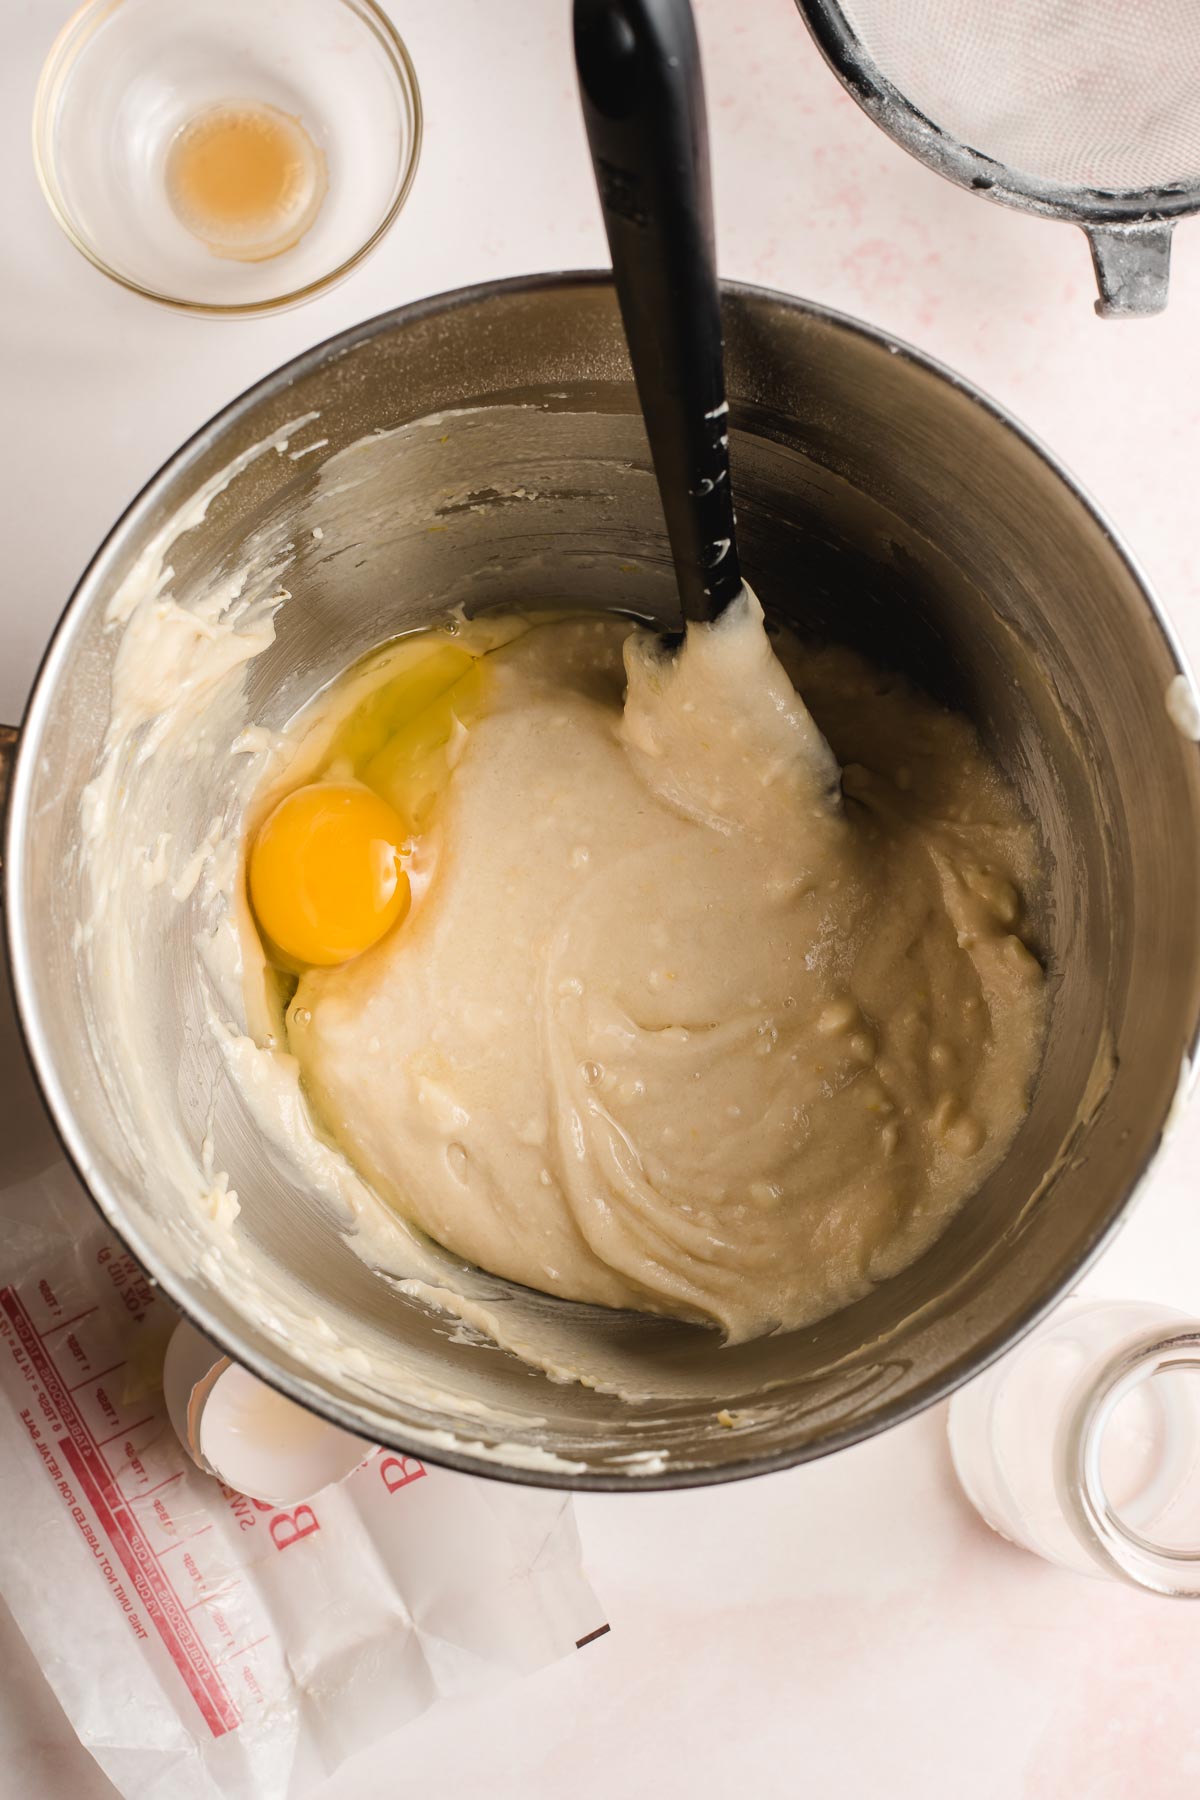 Egg being stirred into cake batter in a stainless steel bowl.